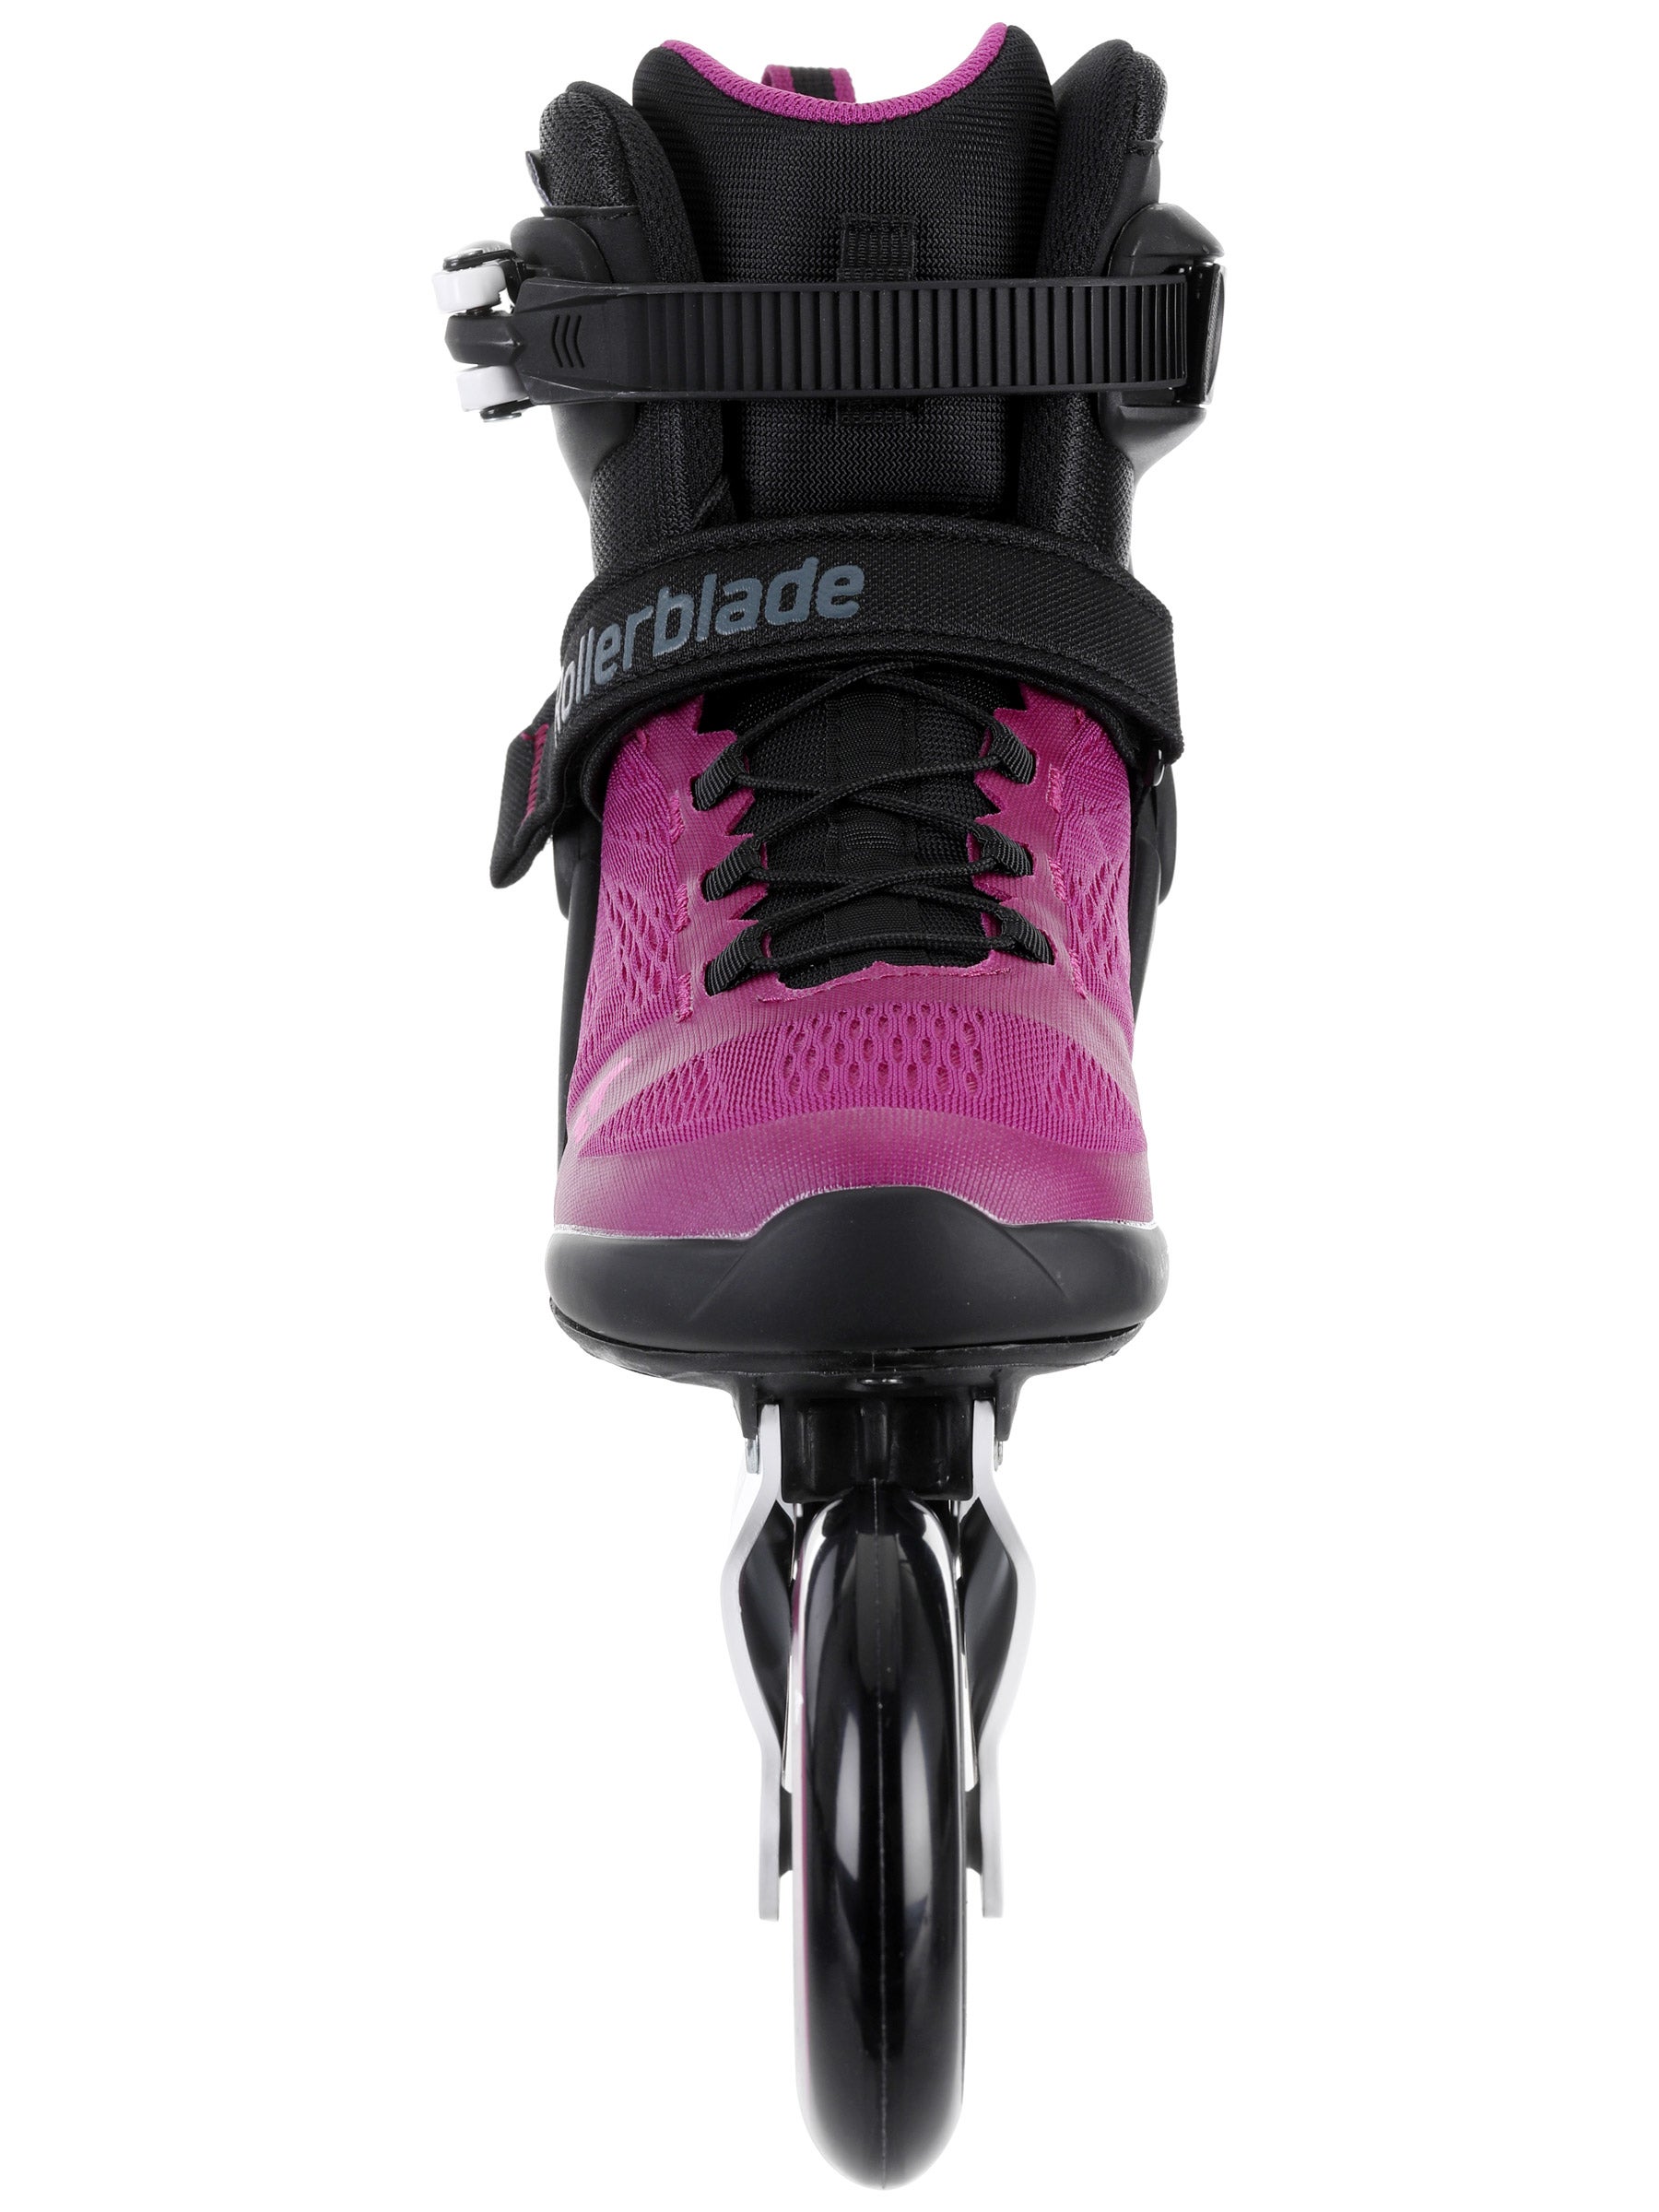 Rollerblade women's Macroblade 100 most sizes NEW! 